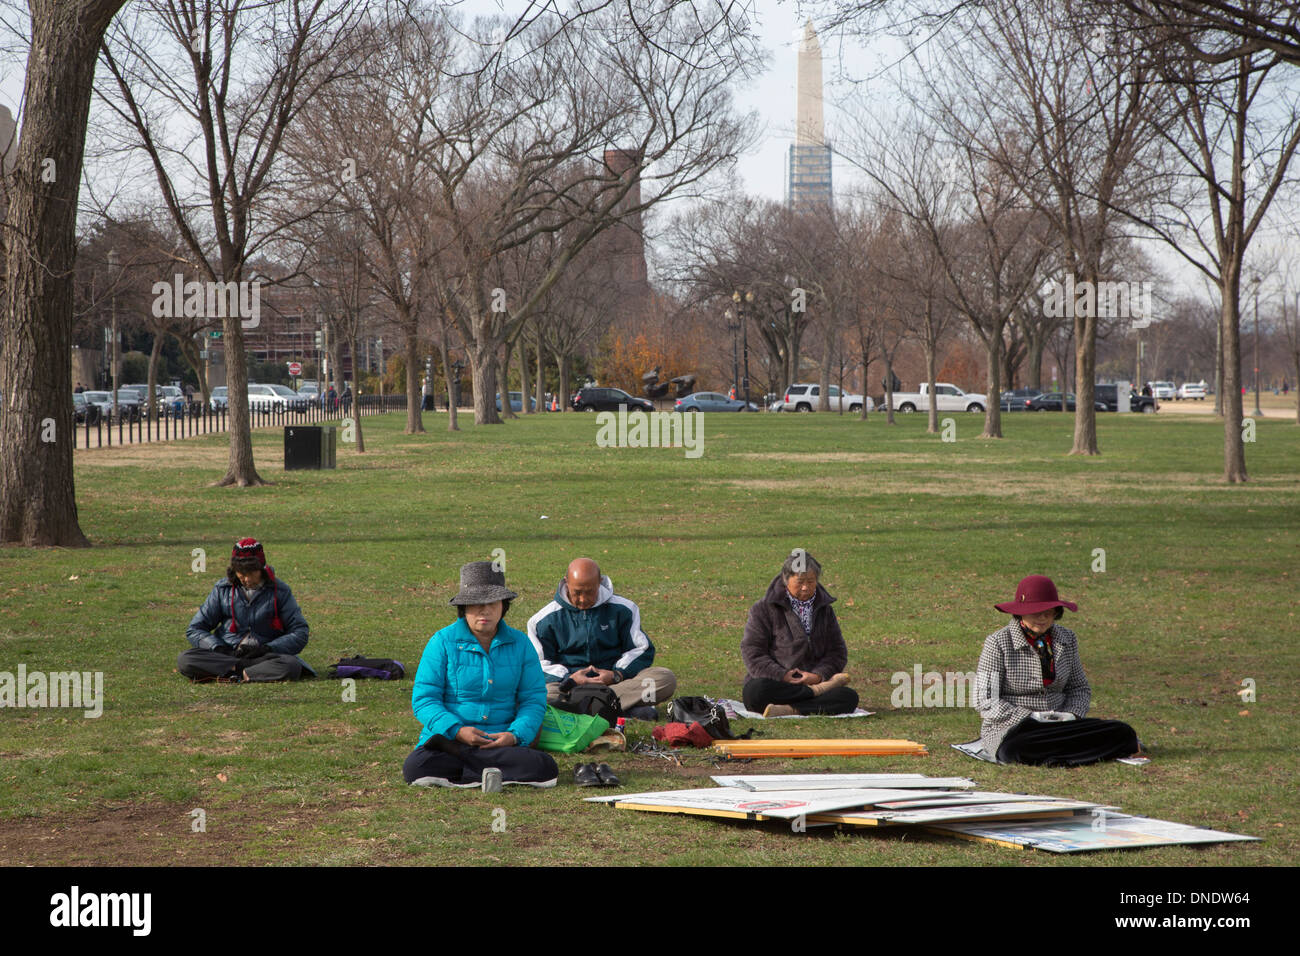 Washington, DC - Falun Gong practitioners meditate on the National Mall. Stock Photo